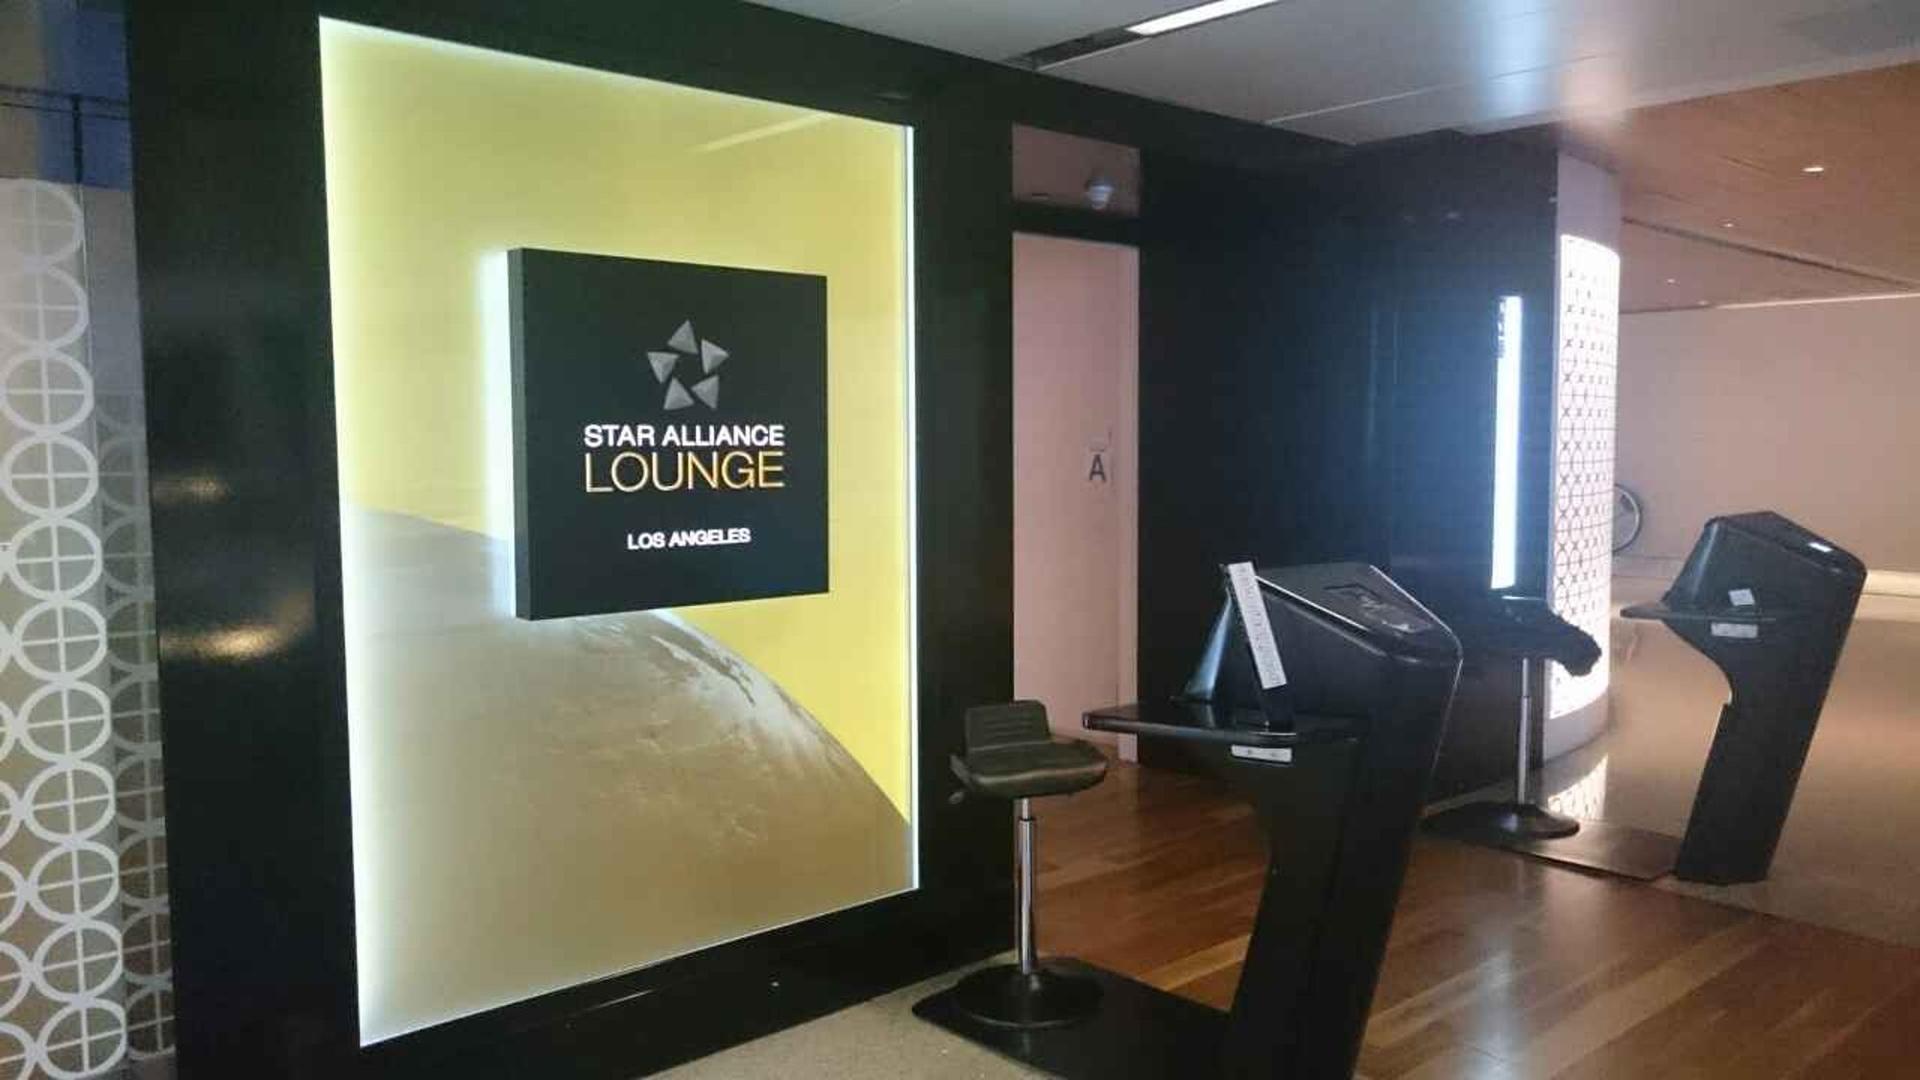 Star Alliance Business Class Lounge image 14 of 72